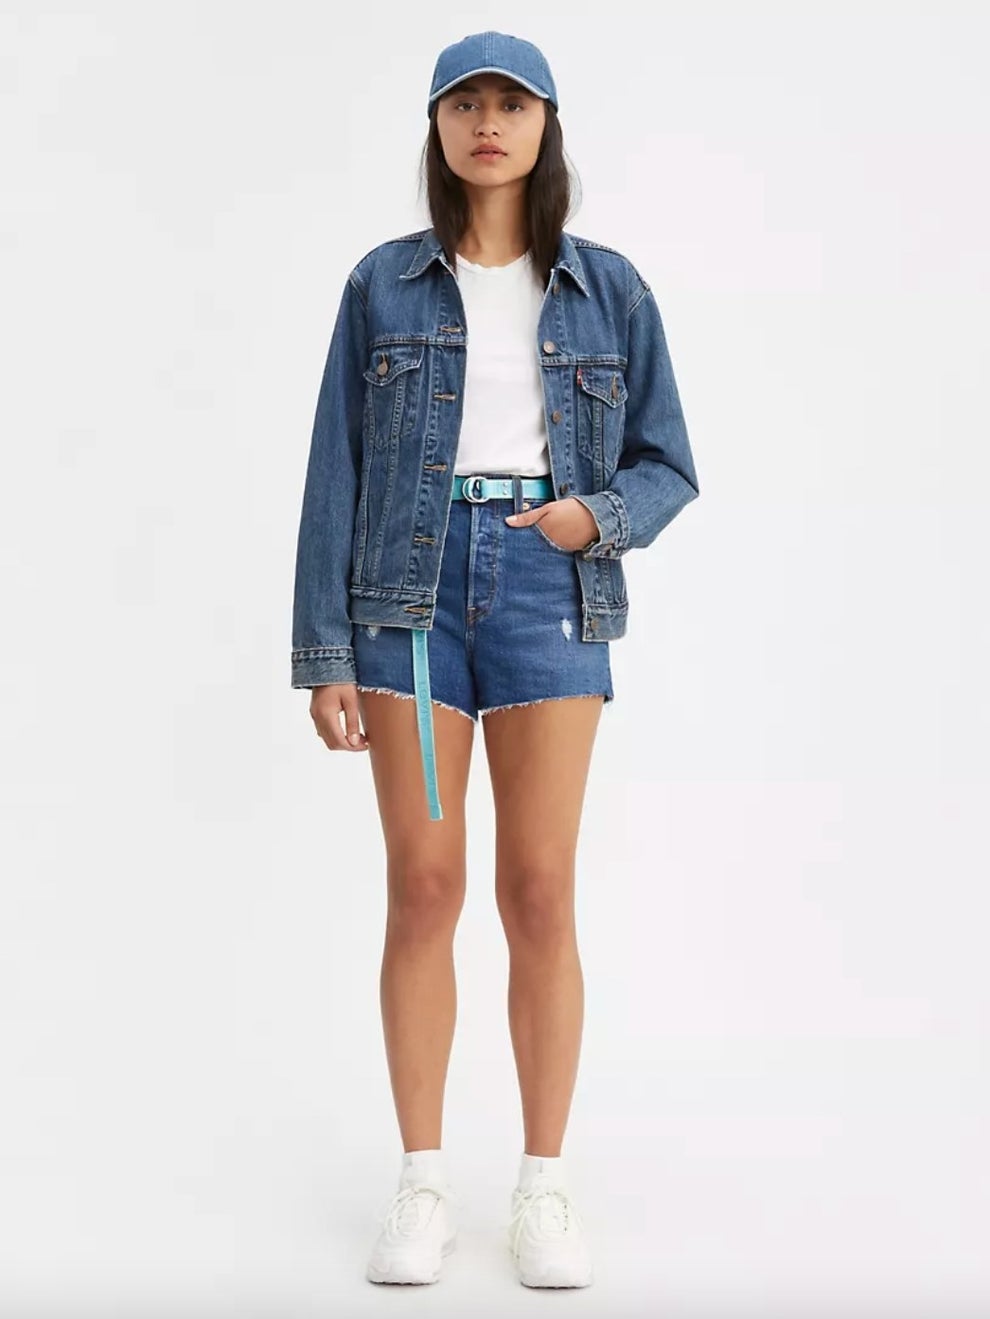 Levi's Just Launched A Massive Sale And We Need A Canadian Tuxedo